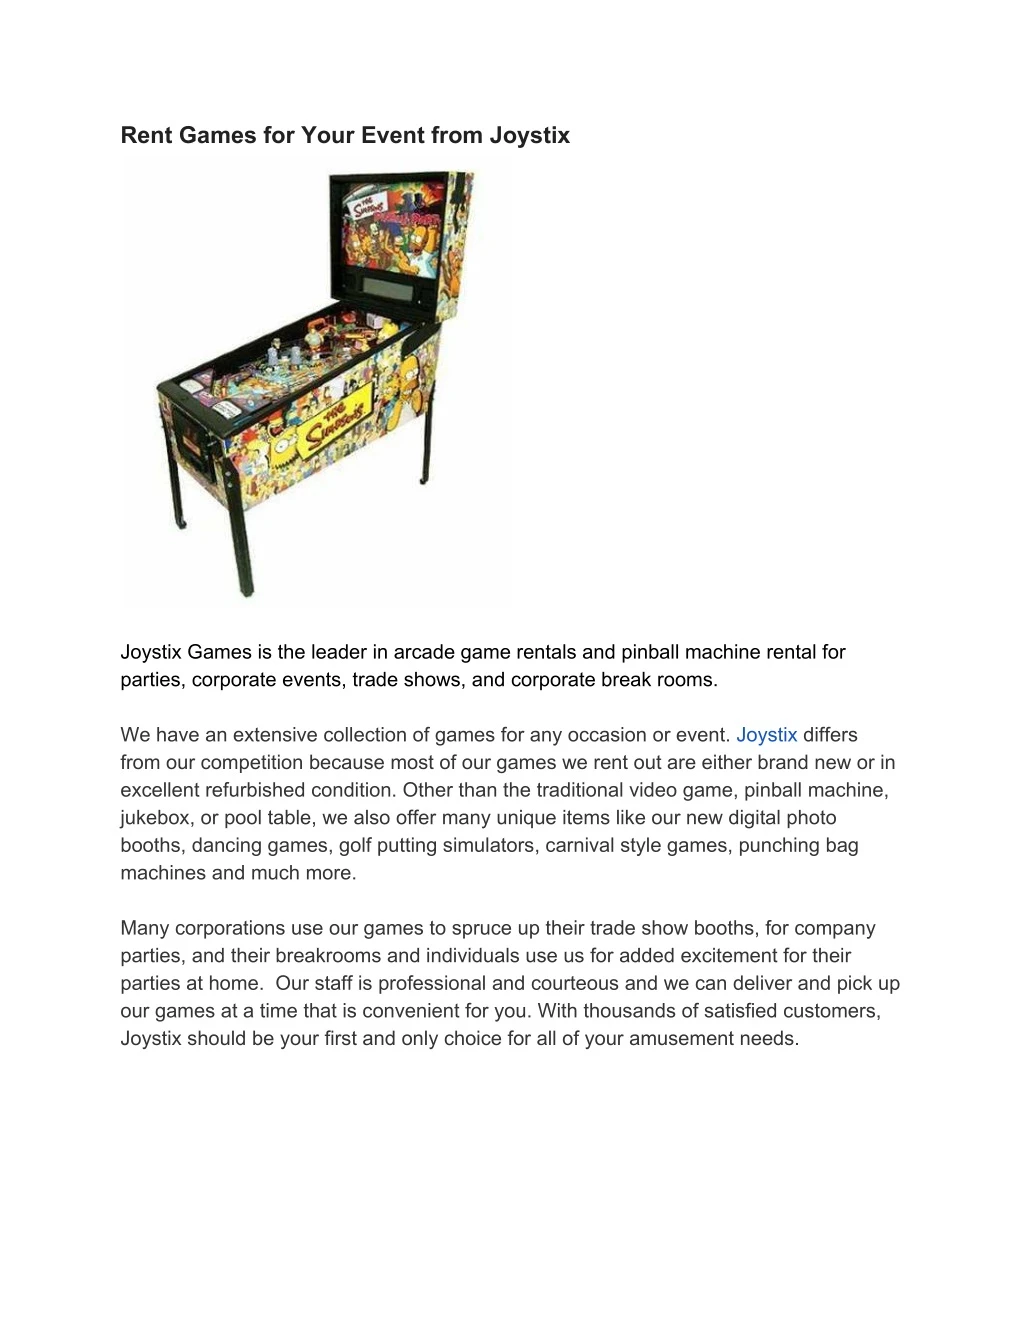 rent games for your event from joystix